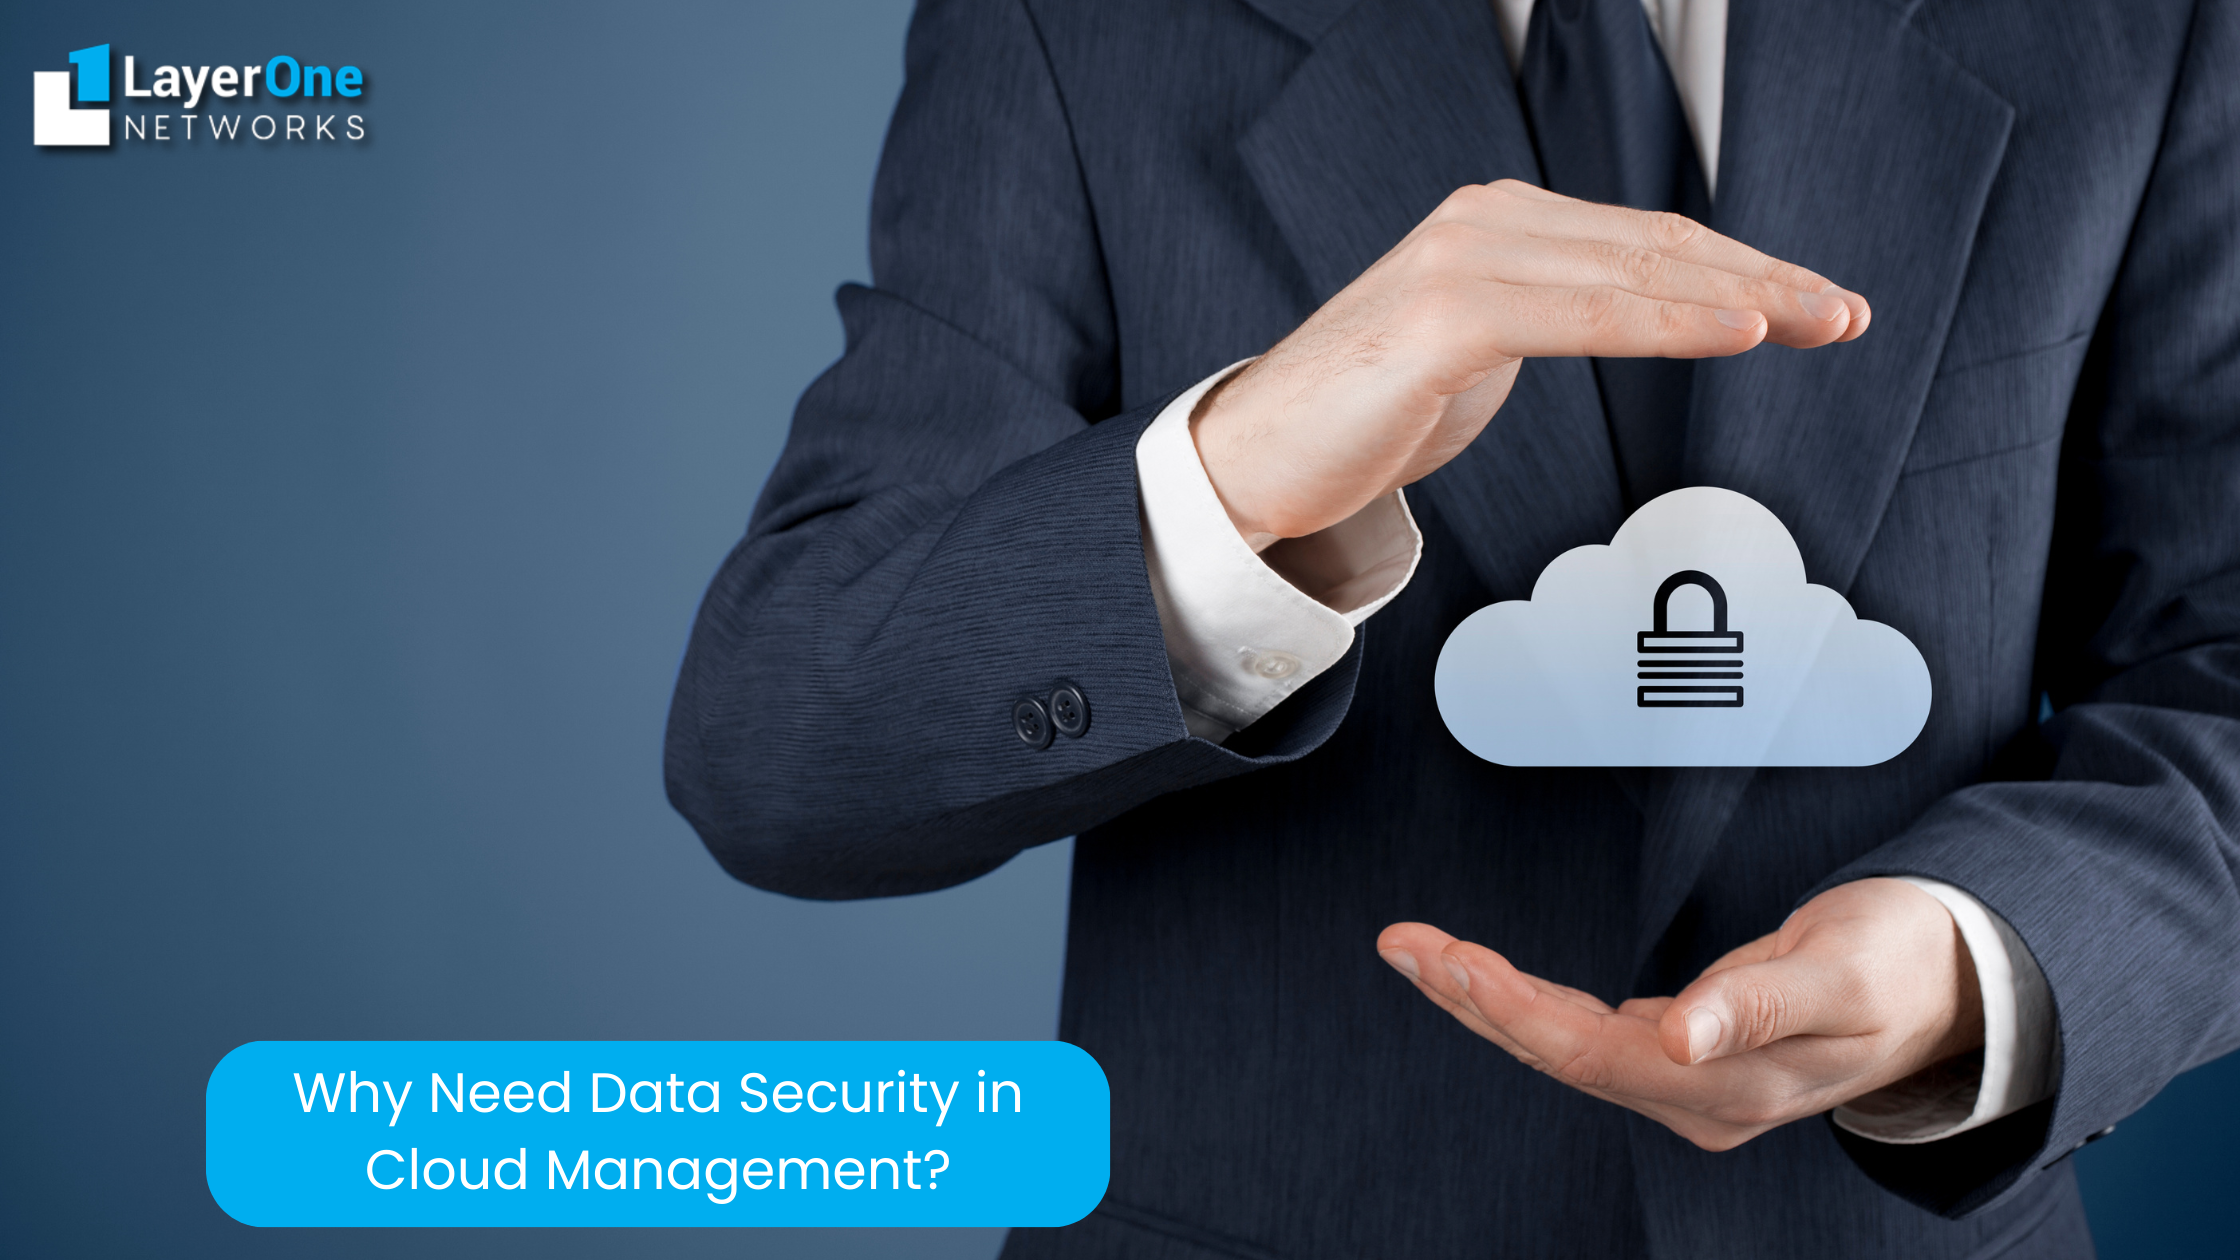 Why Needs Data Security in Cloud Management?